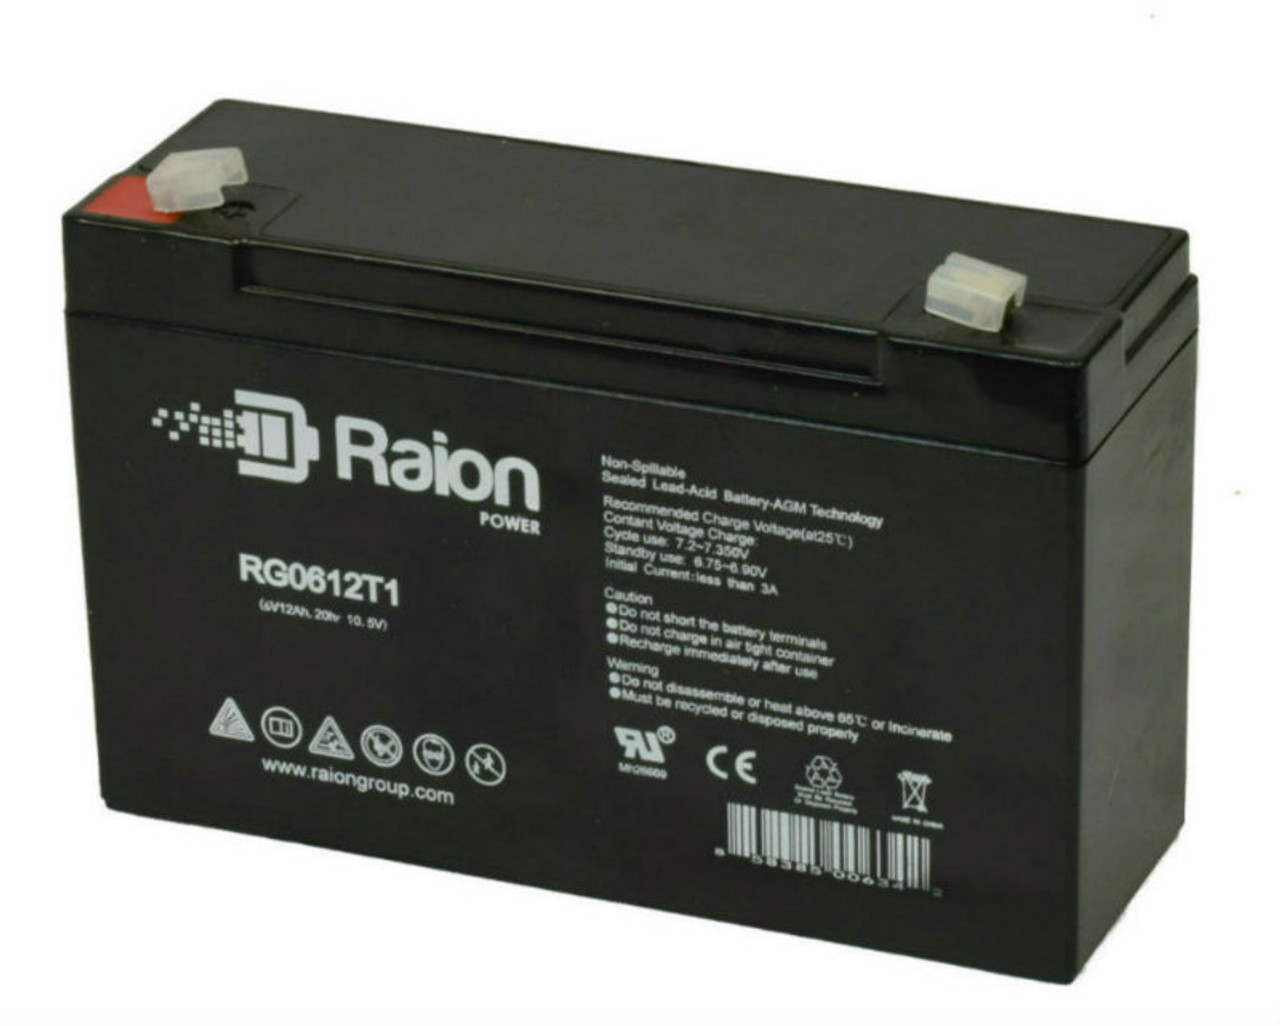 Raion Power RG06120T1 Replacement 6V 12Ah Emergency Light Battery for Light Alarms CE15CA